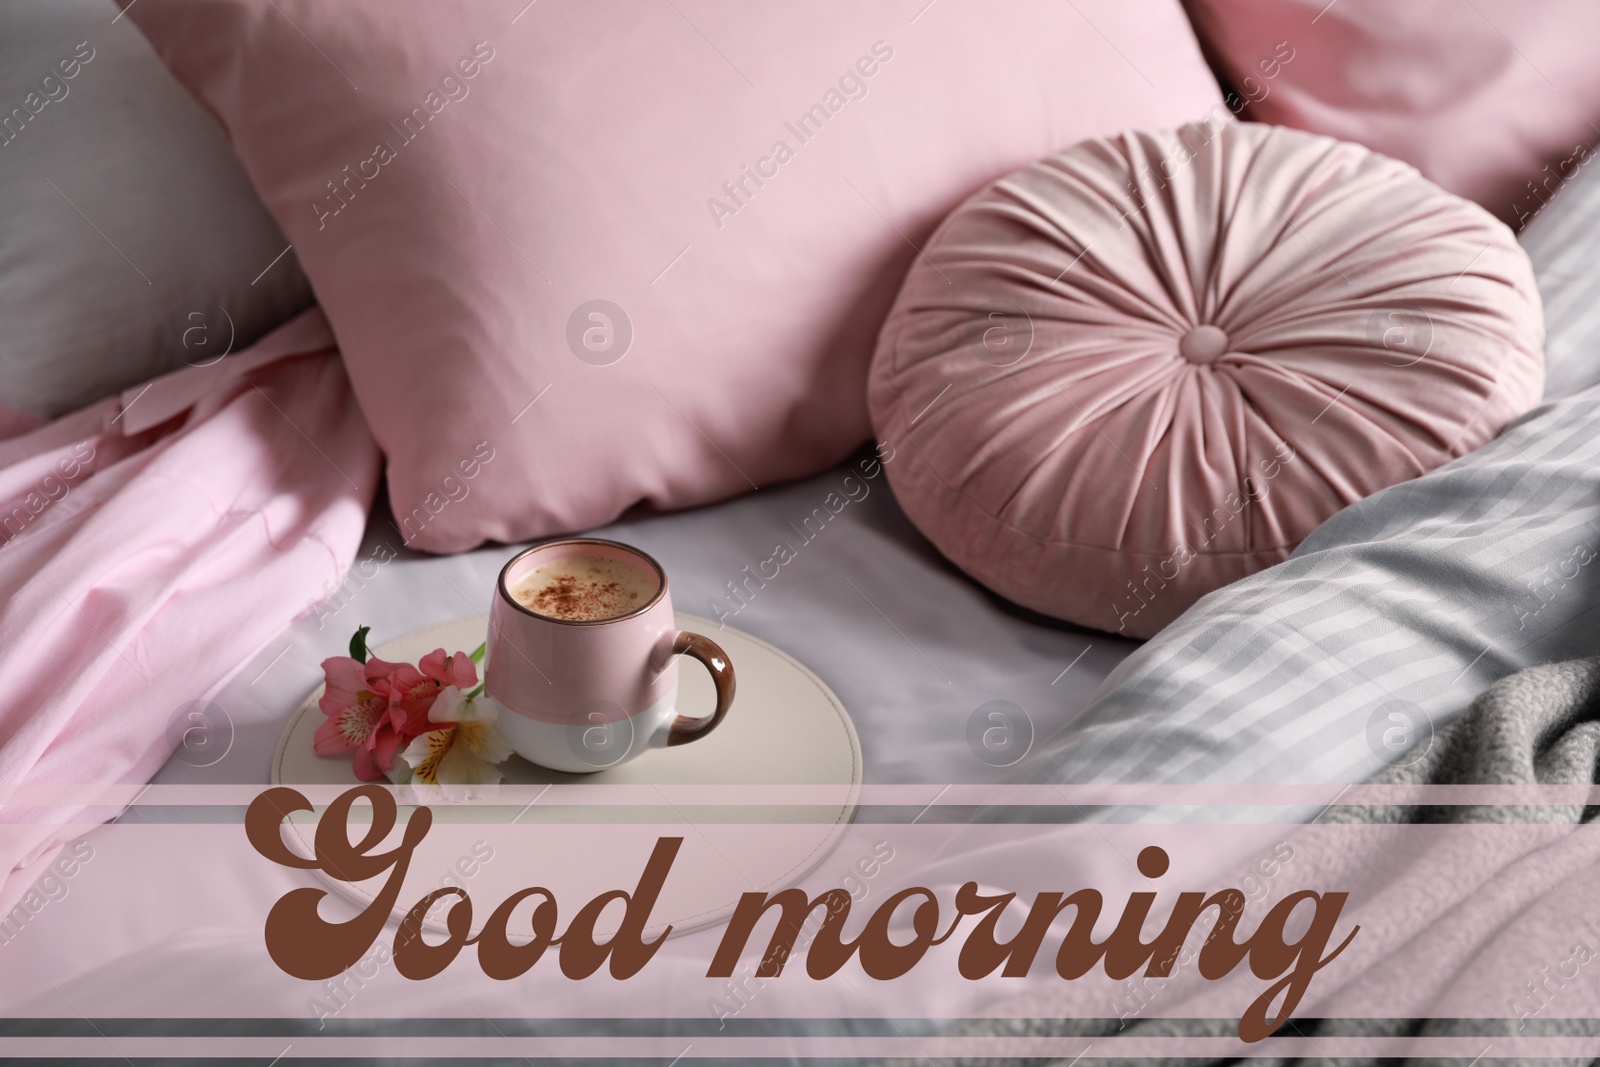 Image of Aromatic coffee and beautiful flowers on bed with fresh linens. Good morning